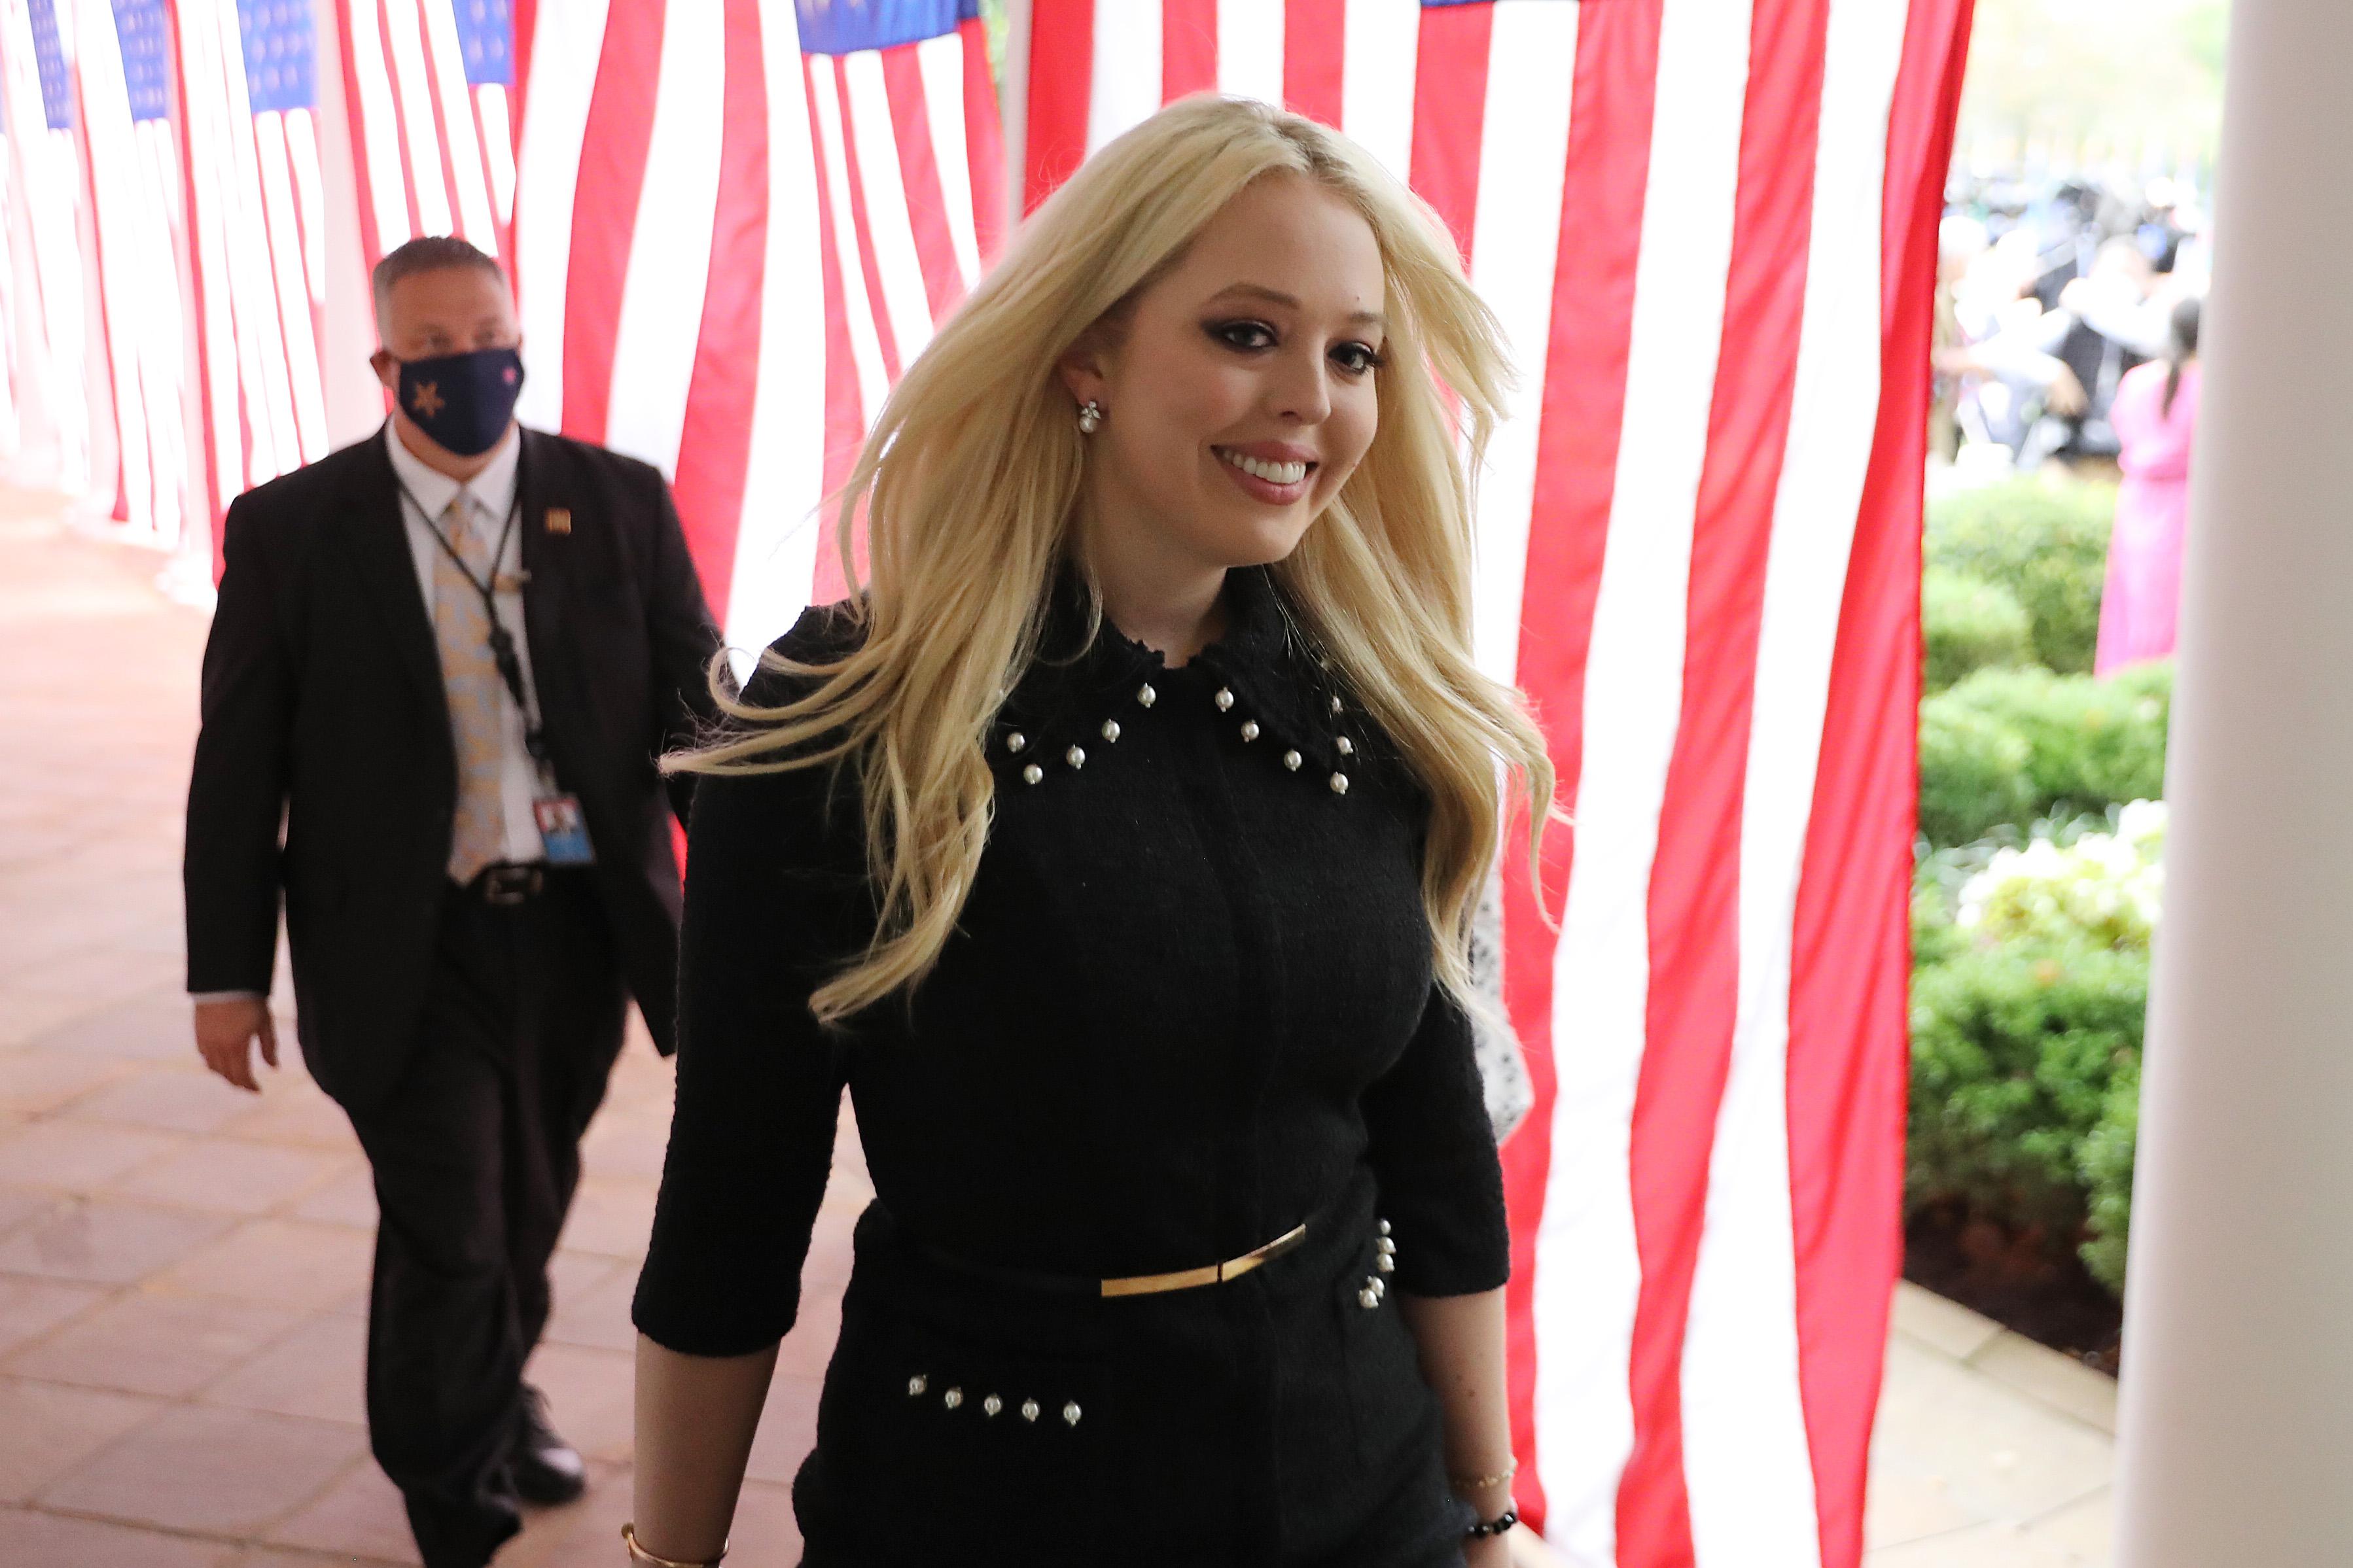 Tiffany Trump, daughter of President Donald Trump, arrives for a ceremony where her father will introduce 7th U.S. Circuit Court Judge Amy Coney Barrett, 48, as his nominee to the Supreme Court in the Rose Garden at the White House Sept. 26, 2020, in Washington, D.C.